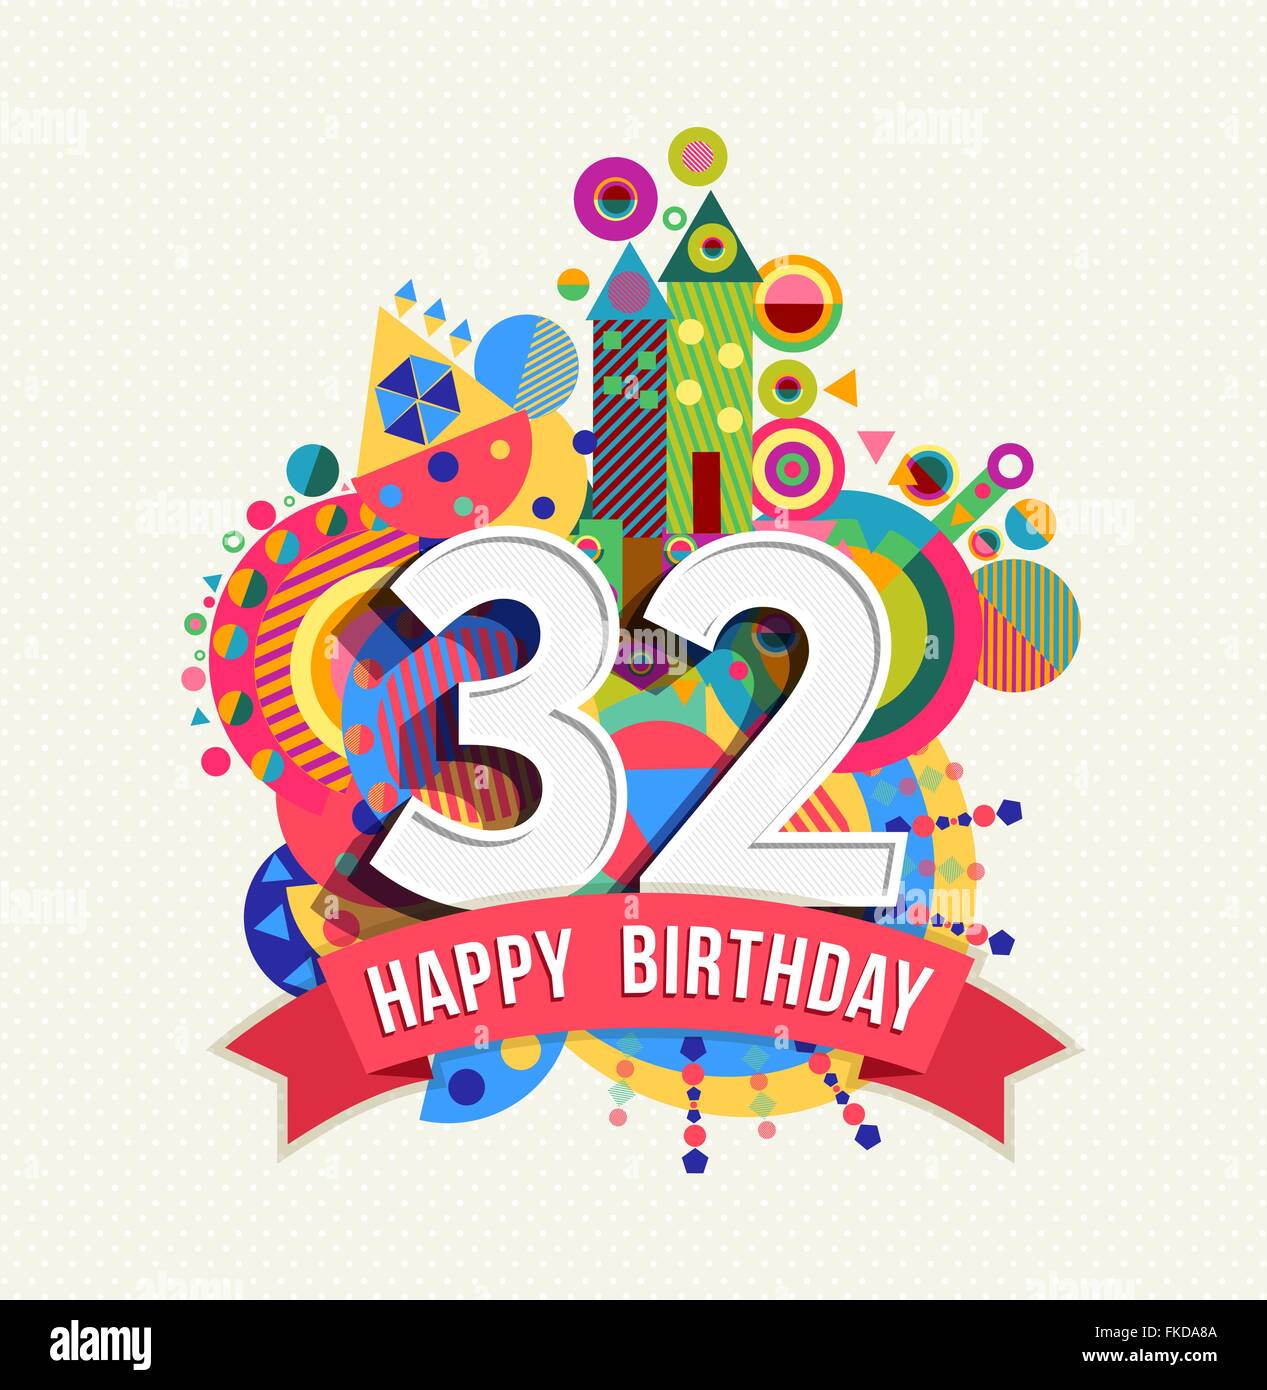 Happy Birthday thirty two 32 year, fun celebration anniversary greeting card with number, text label and colorful geometry Stock Vector